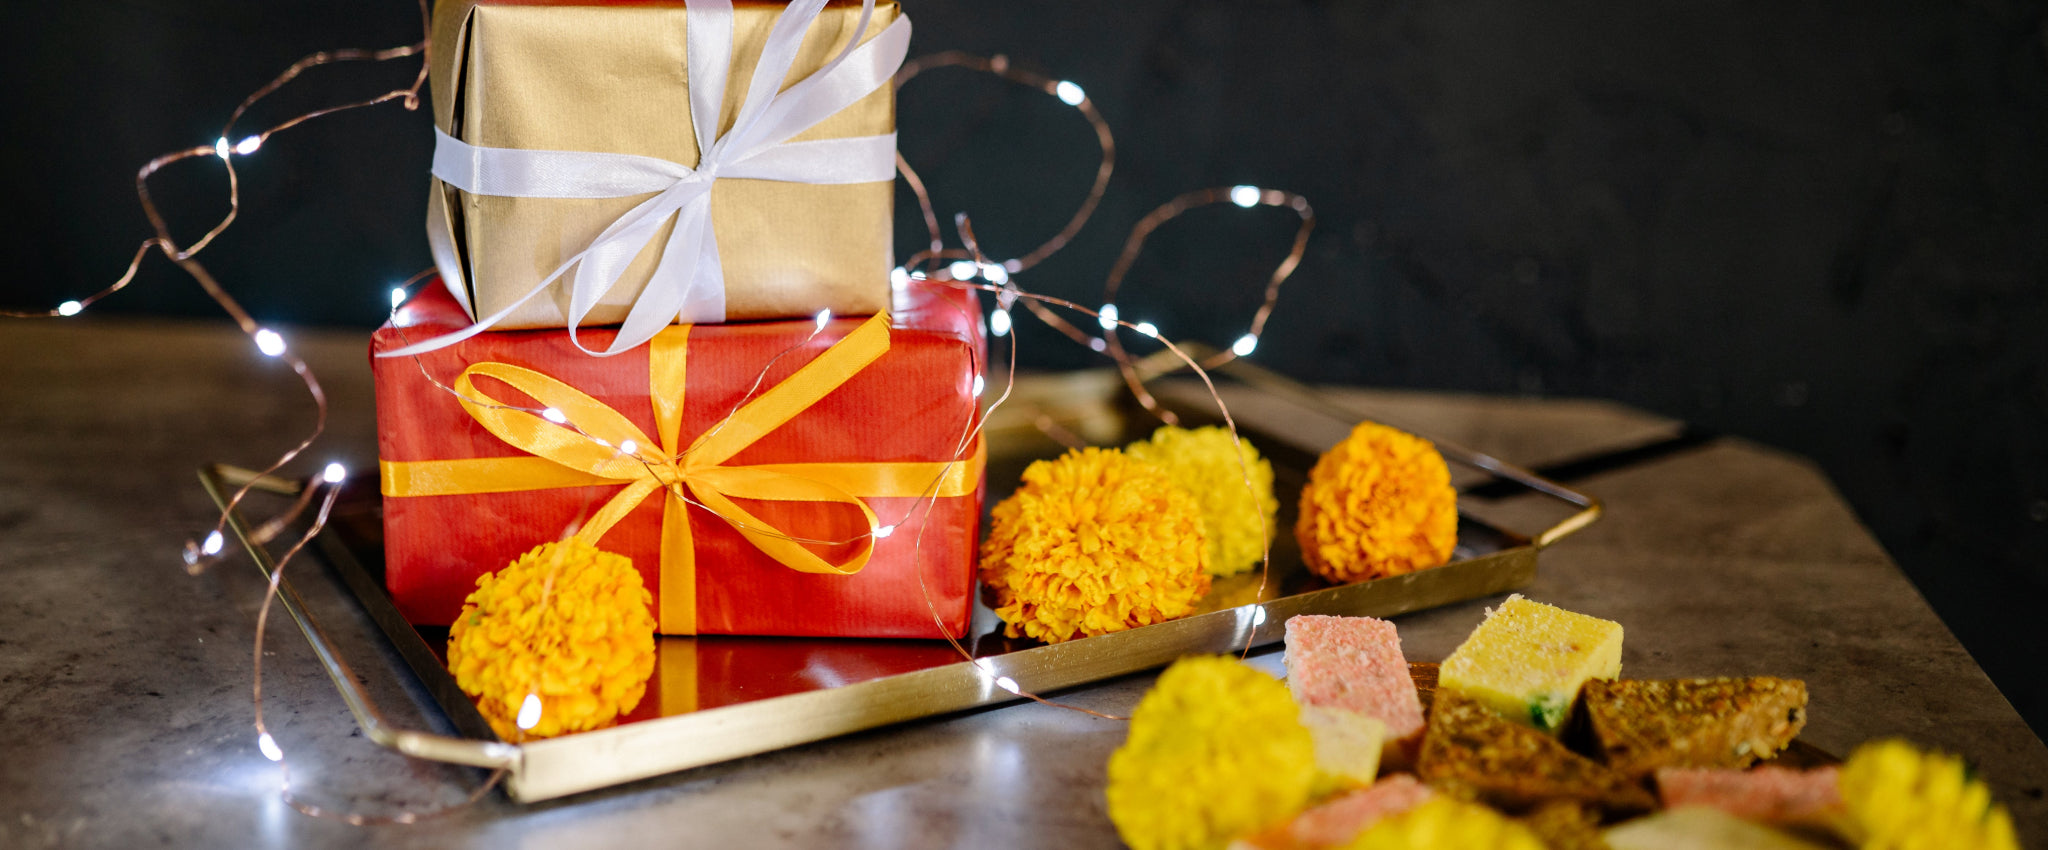 What is the best Diwali gift that you have got from your employer? What  could be some great Diwali gift ideas? - Quora